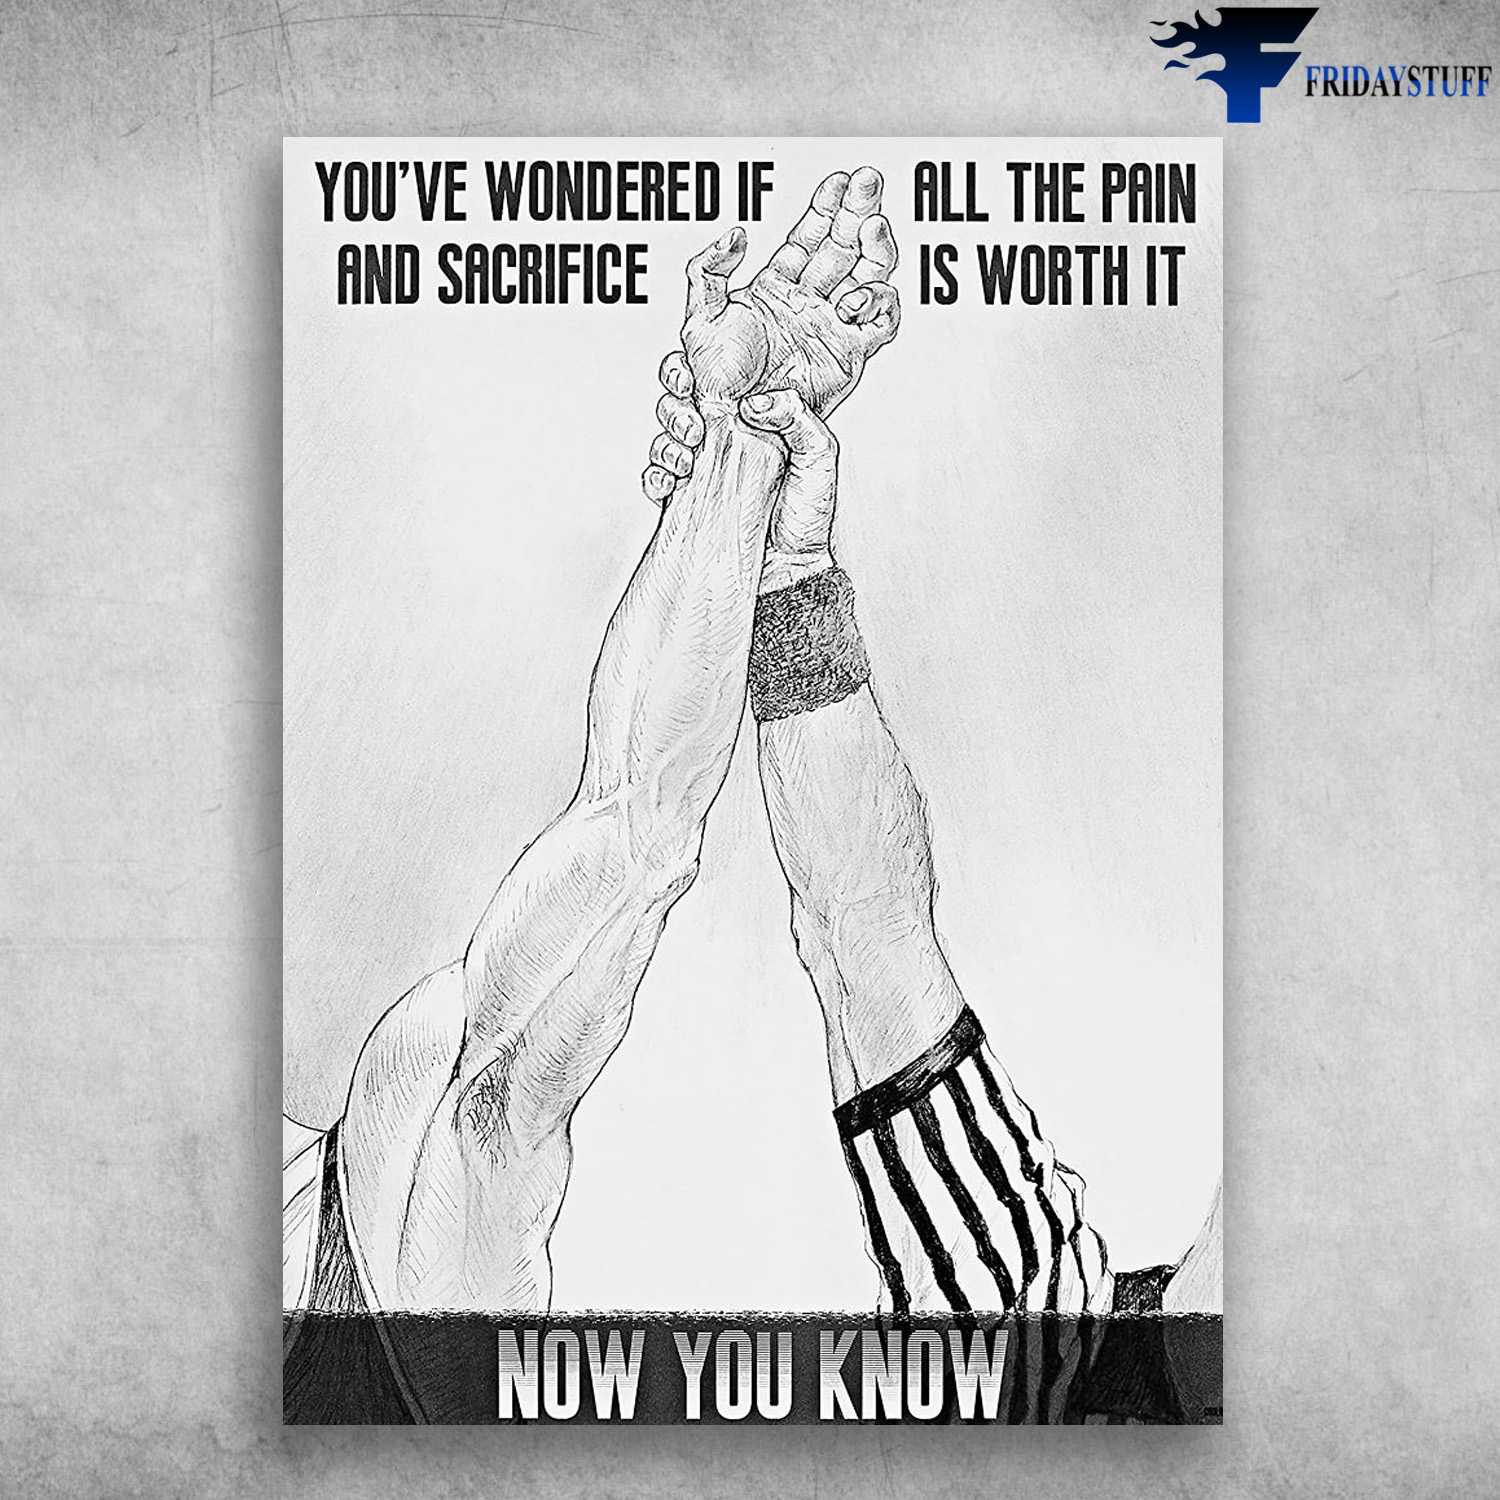 Wrestling Poster, Wrestling Lover, You've Wondered If And Sacrifice, All  The Pain Is Worth It, Now You Know - FridayStuff